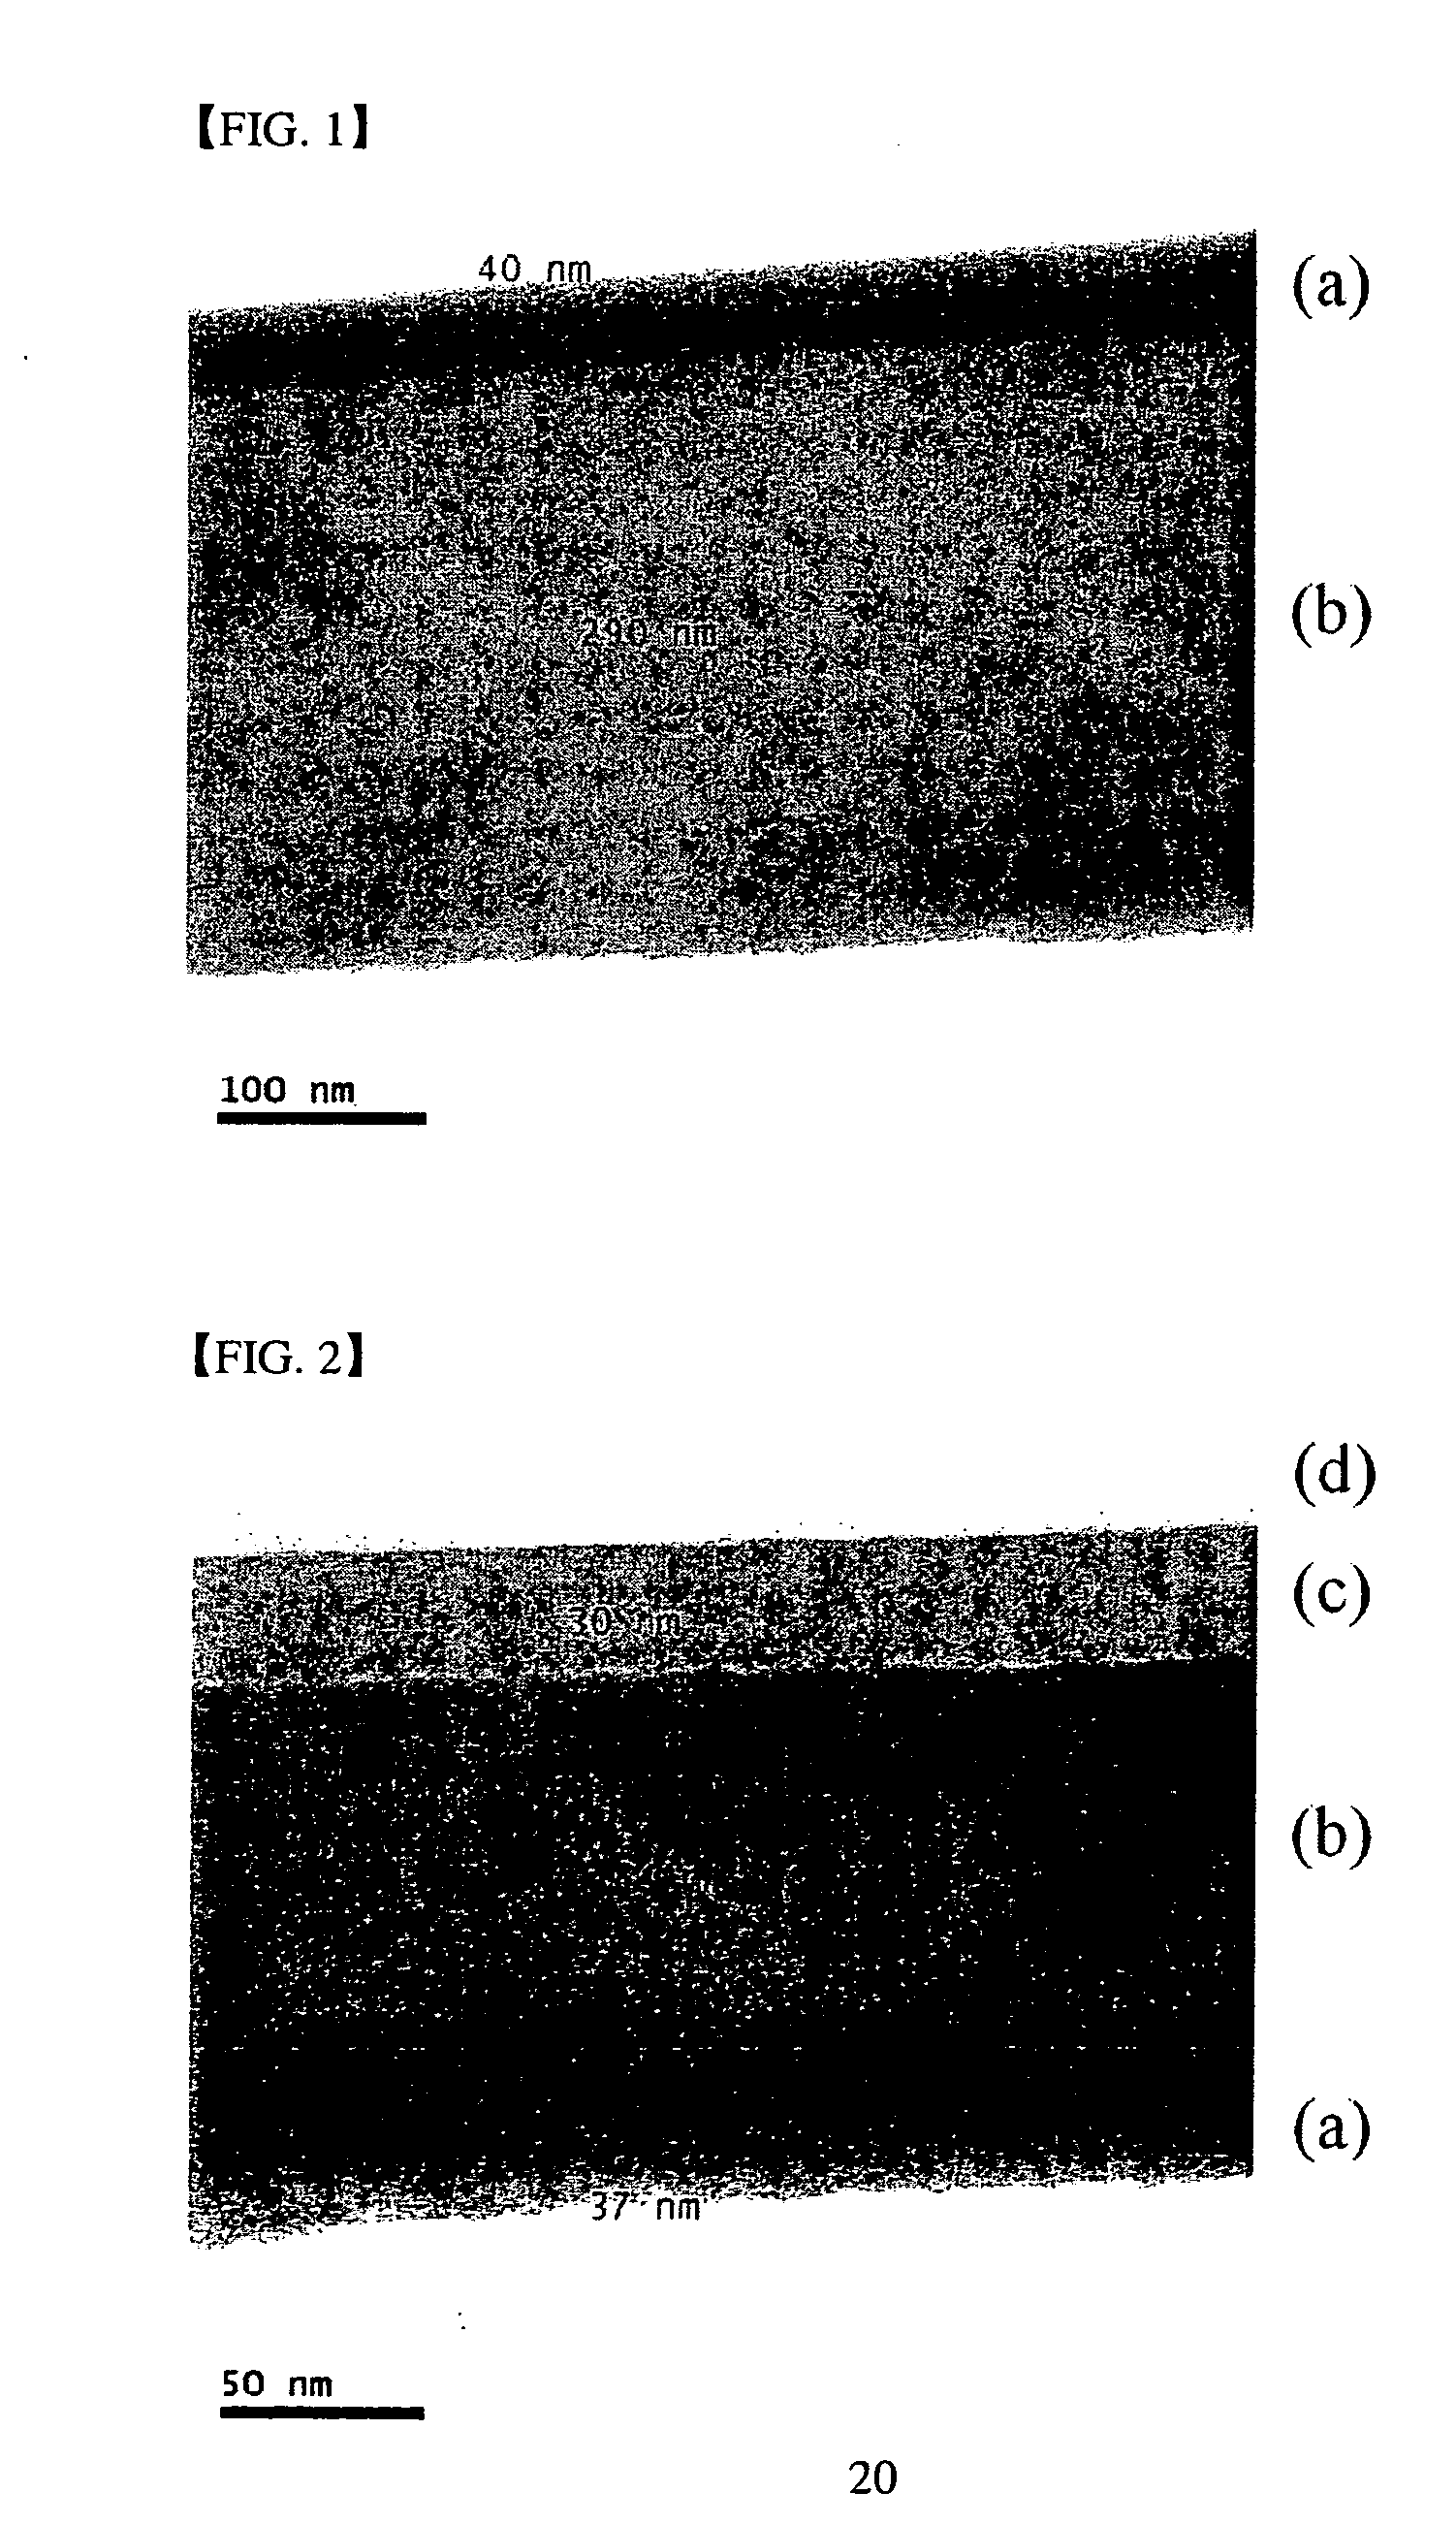 Cobalt-based alloy electroless planting solution and electroless plating method using the same